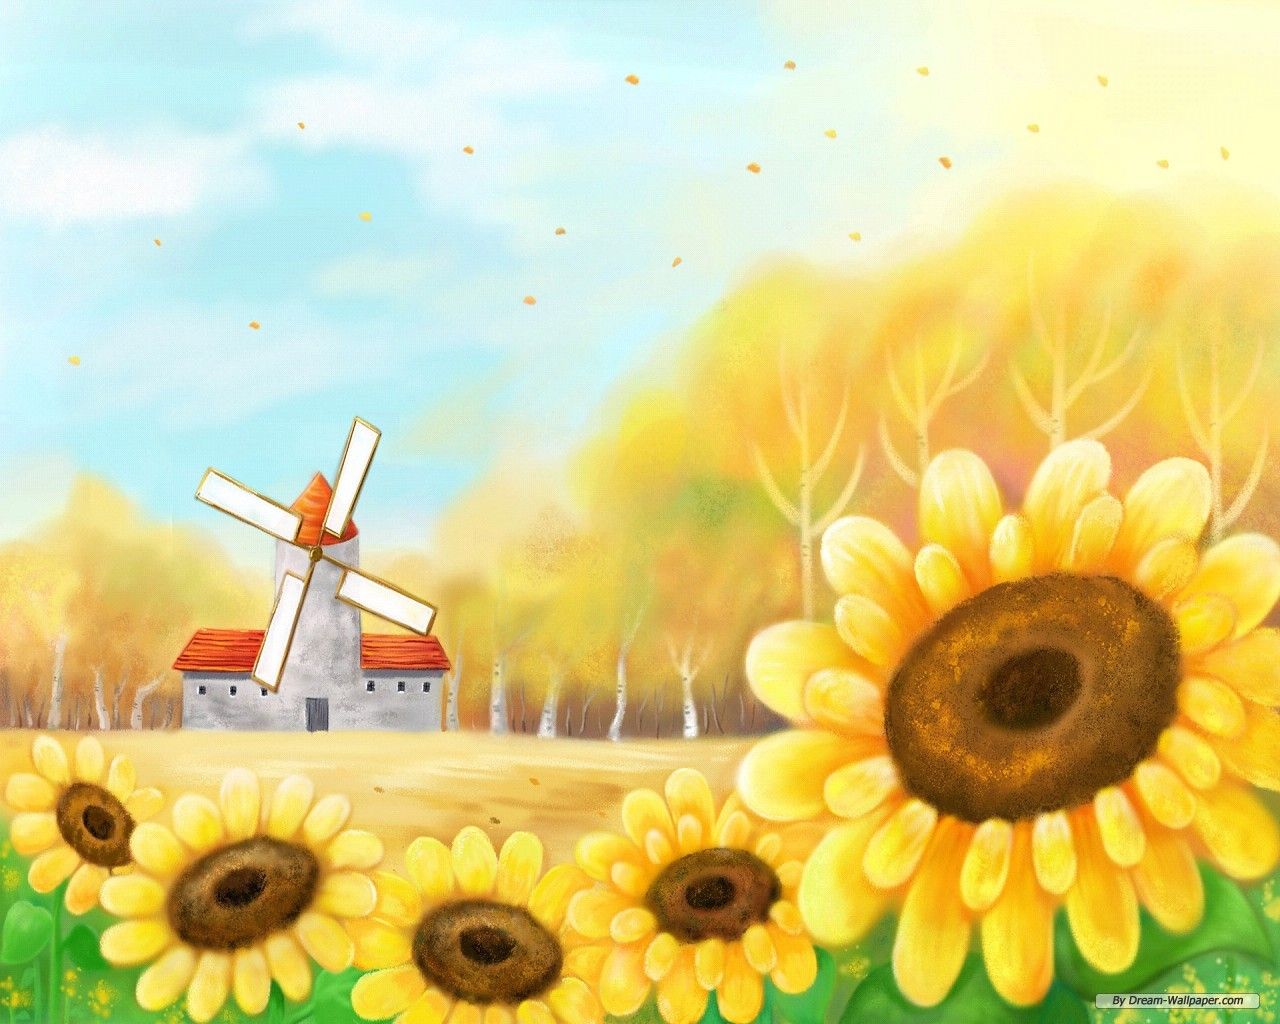 Cartoon Wallpaper Images Background 2011 High Quality | High ...